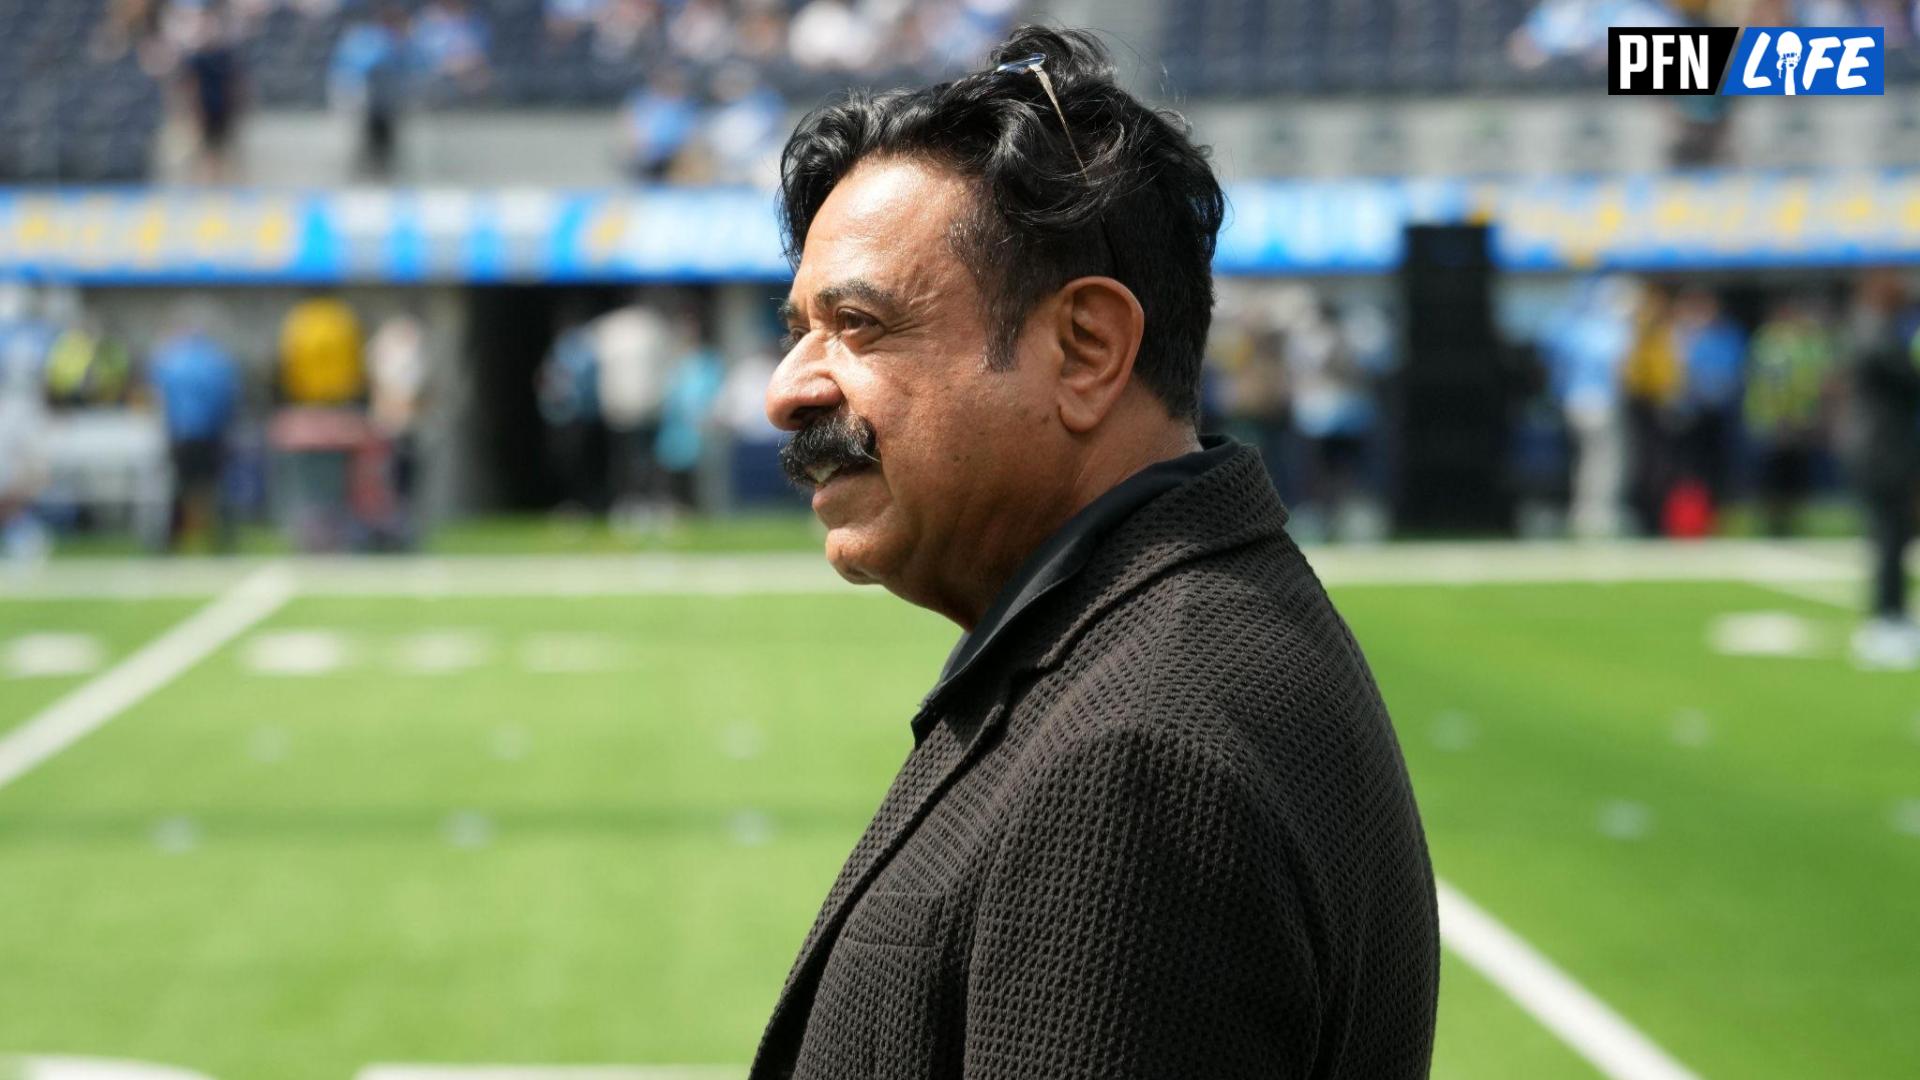 Jacksonville Jaguars owner Shad Khan aka Shahid Khan (left) during the game against the Los Angeles Chargers at SoFi Stadium.